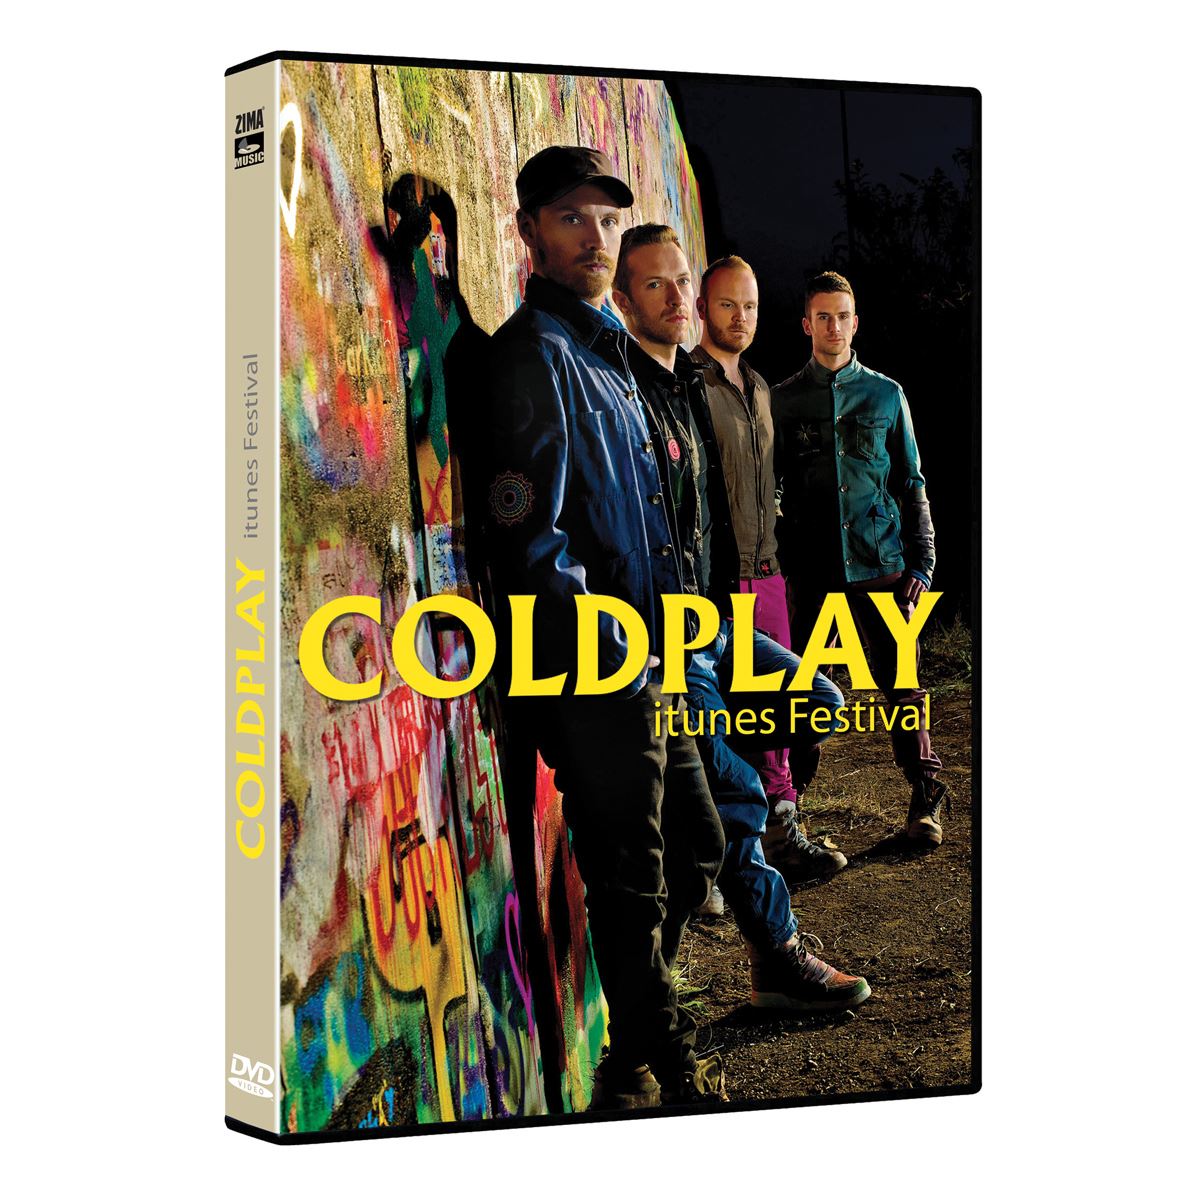 Coldplay  iTunes Festival